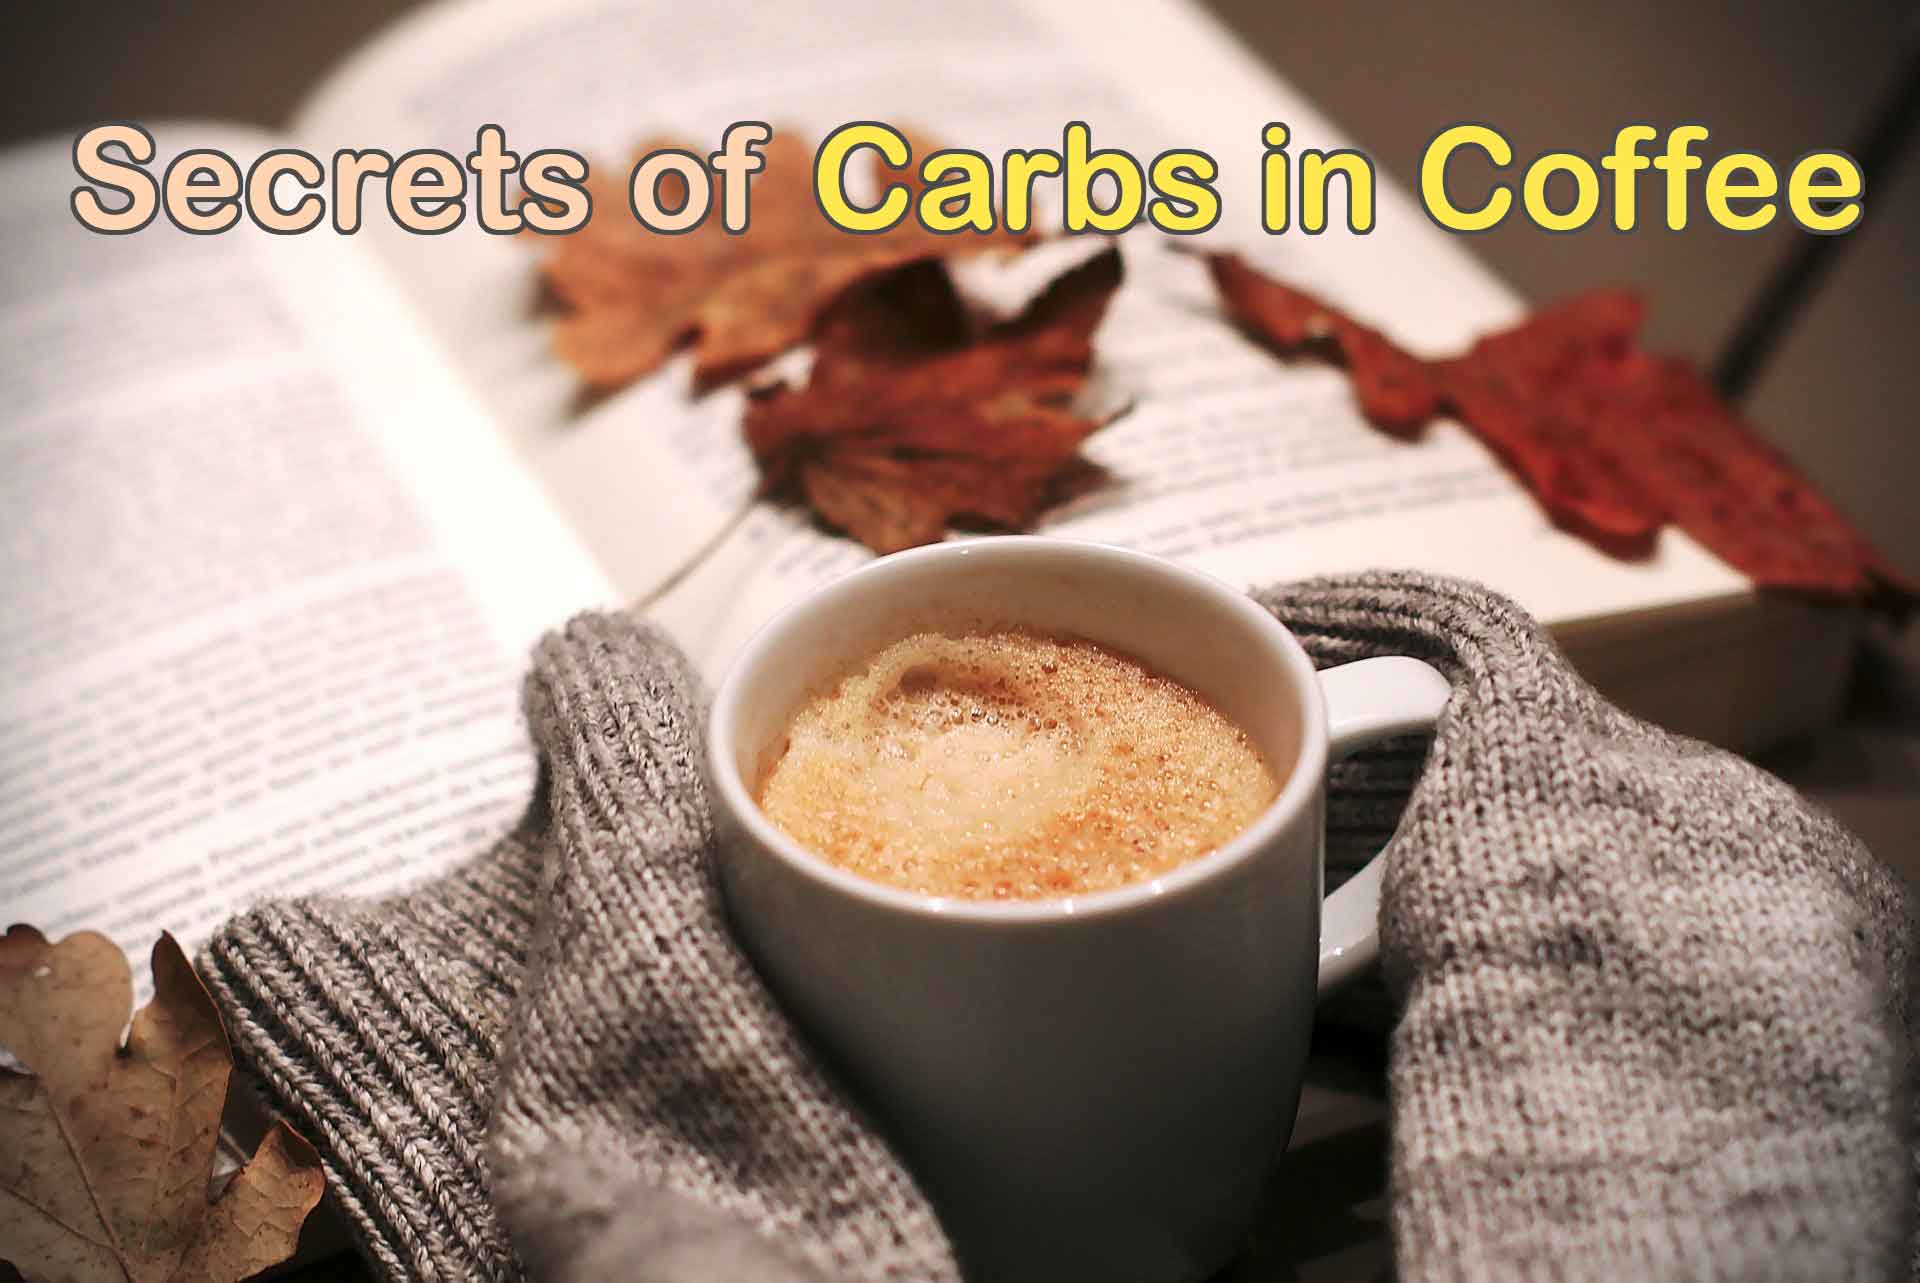 Carbs in coffee